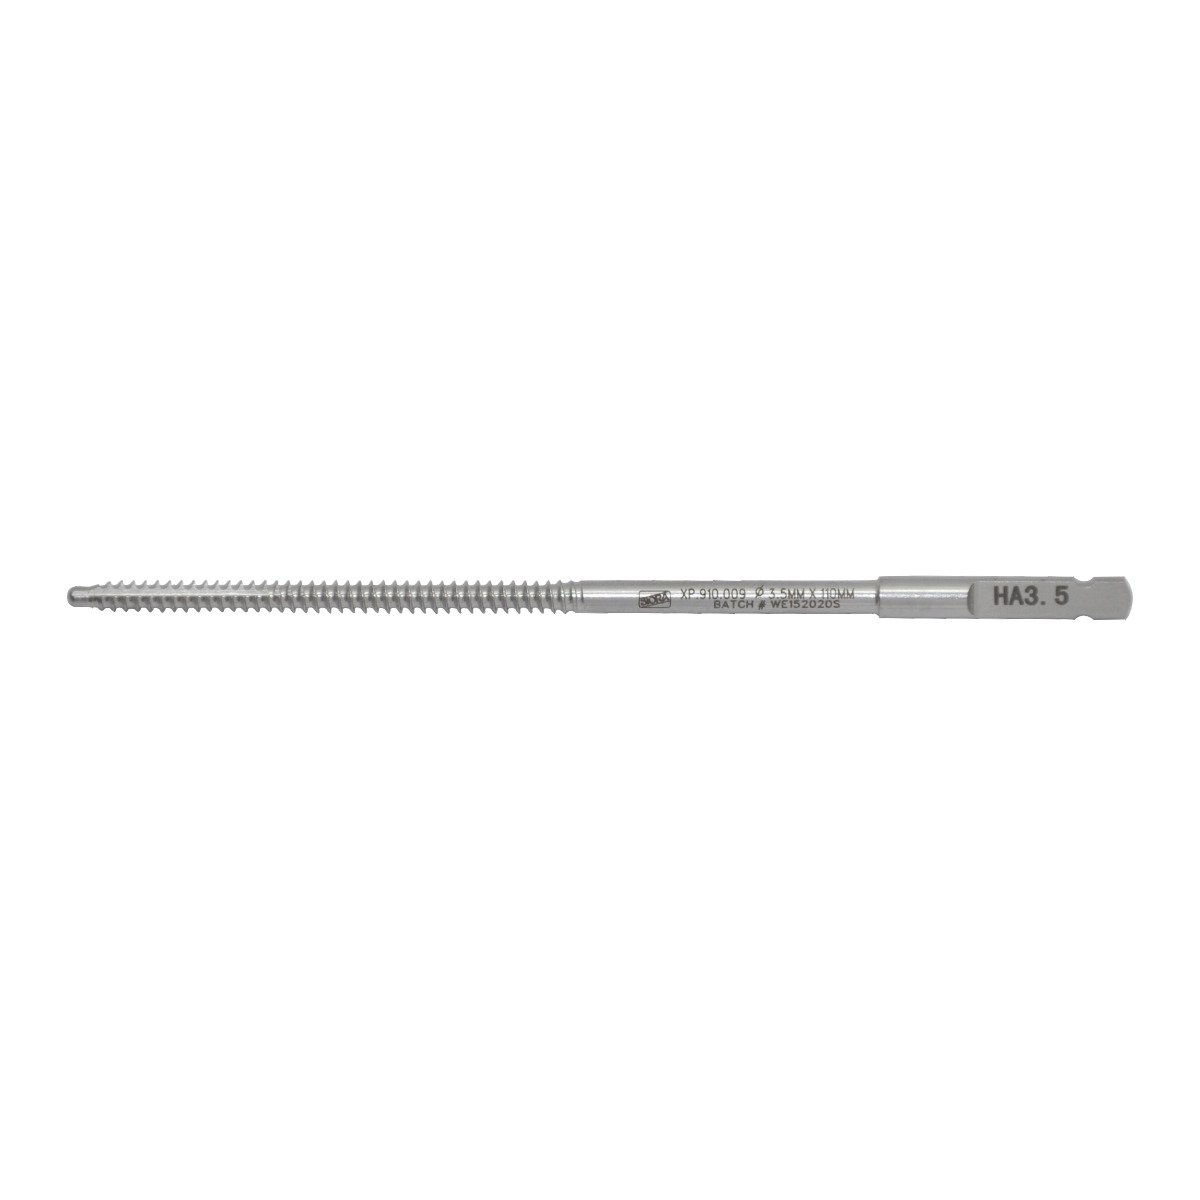 Bone Tap – Quick Coupling End Dia. 3.5mm, Thread Length 65mm, Total Length 185mm